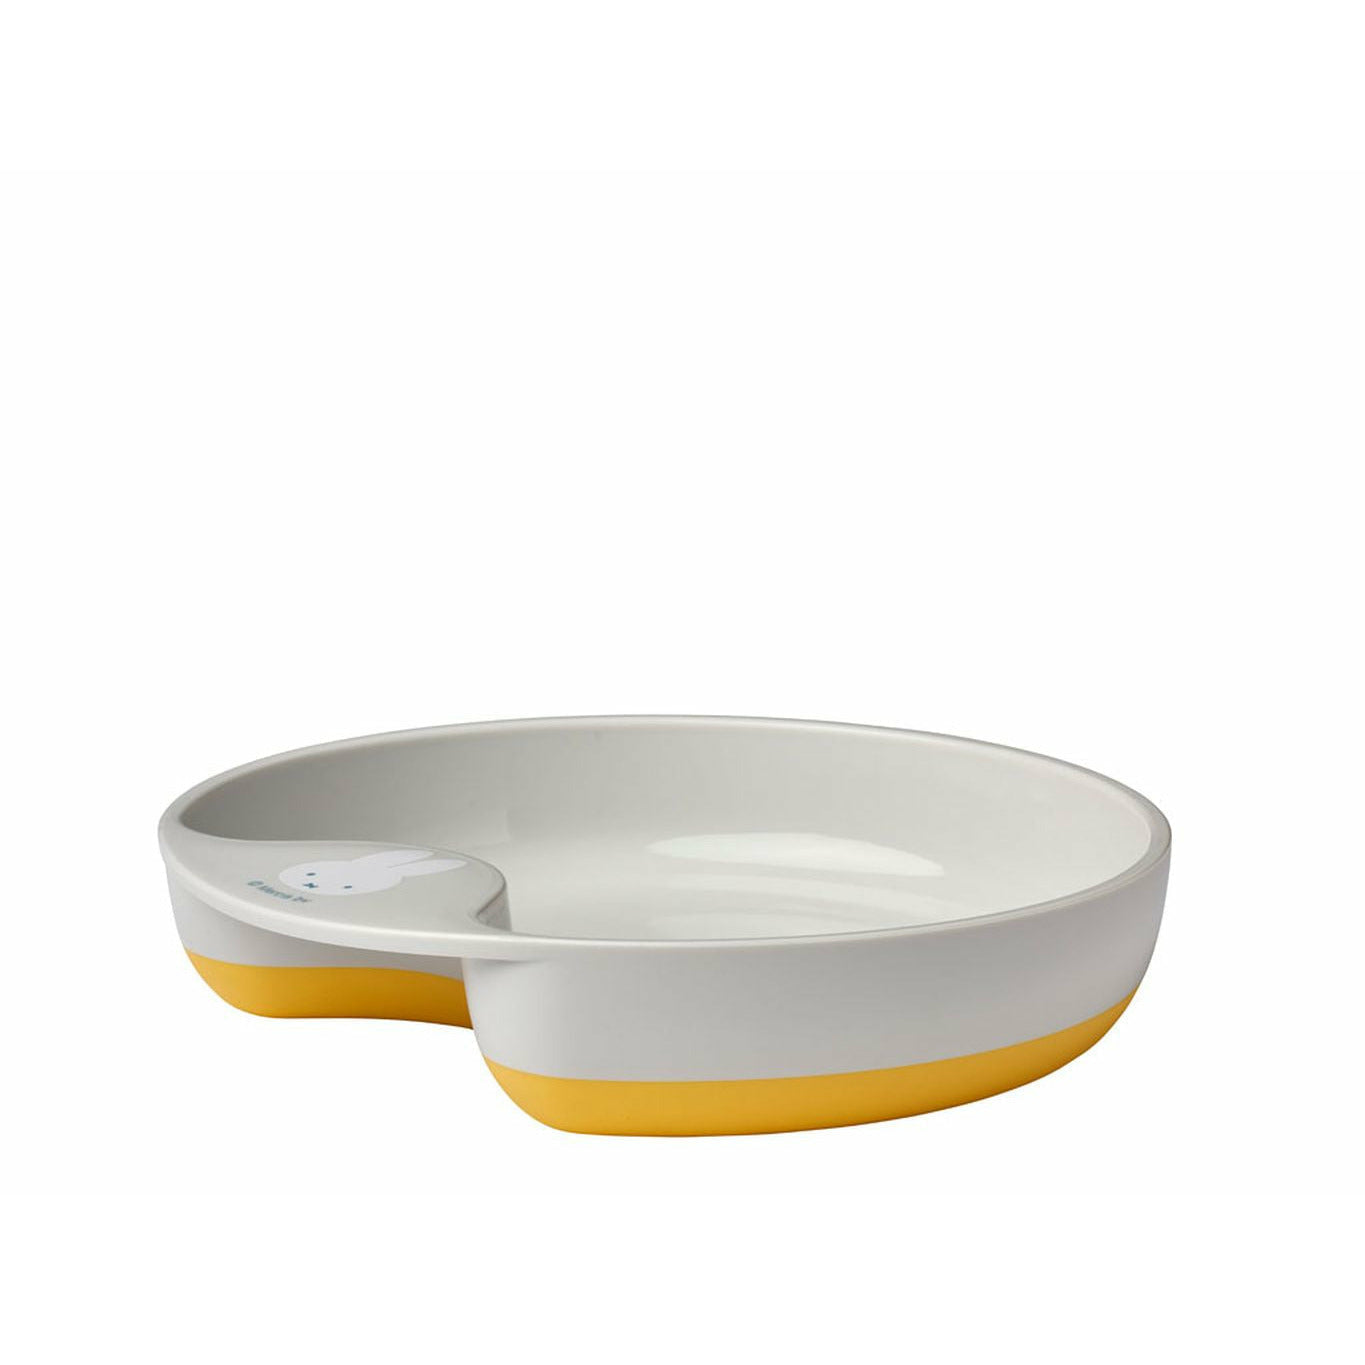 Mepal Mio Learning Plate, Yellow